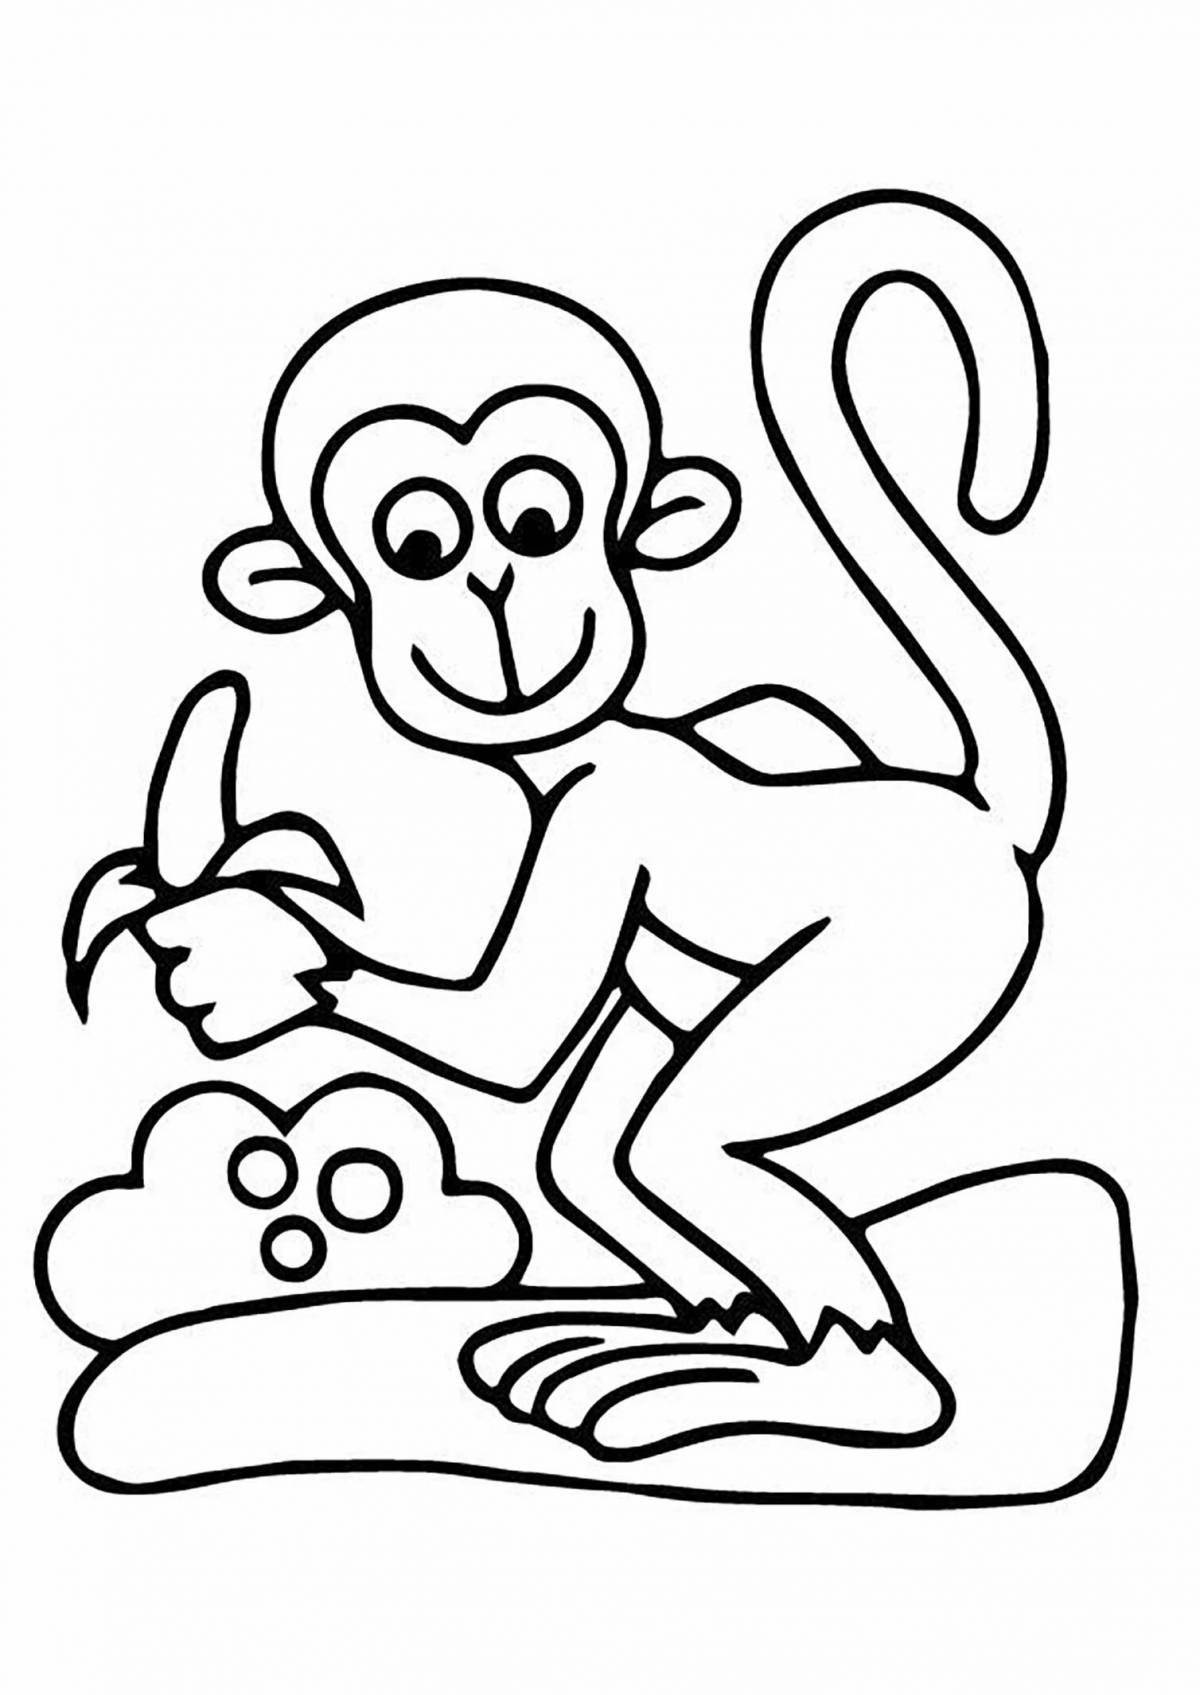 Colorful monkey figurine coloring page